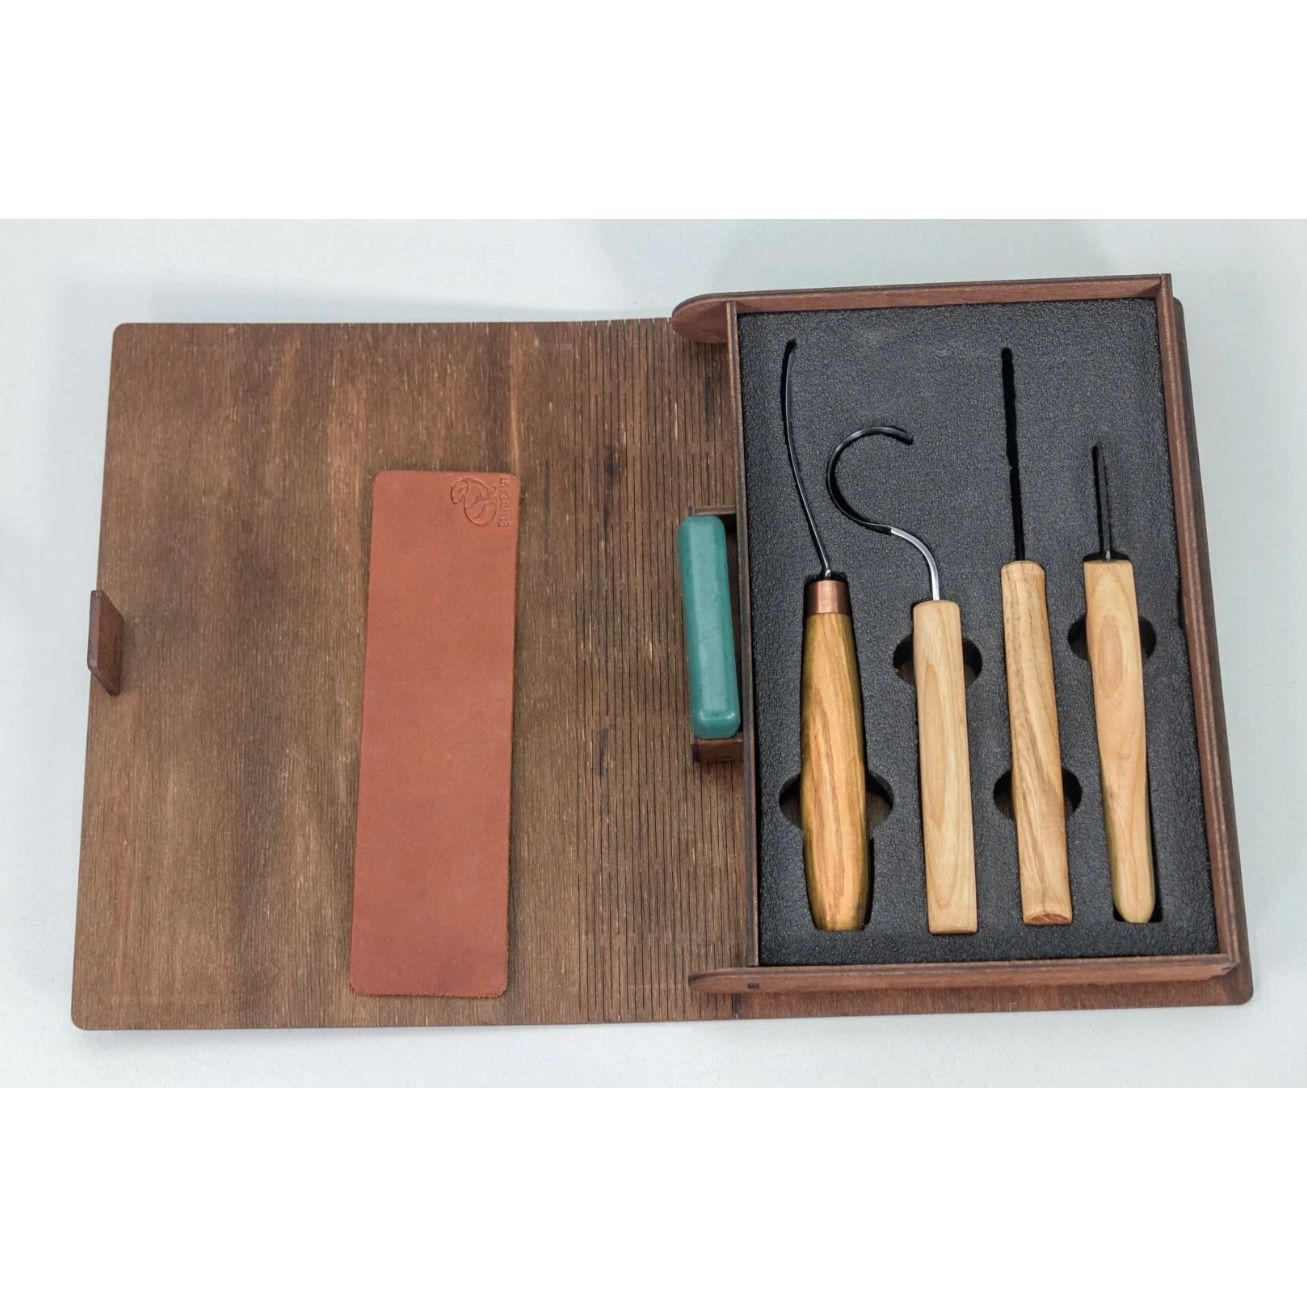 BeaverCraft Spoon and Kuksa Carving Professional Set in Gift Box